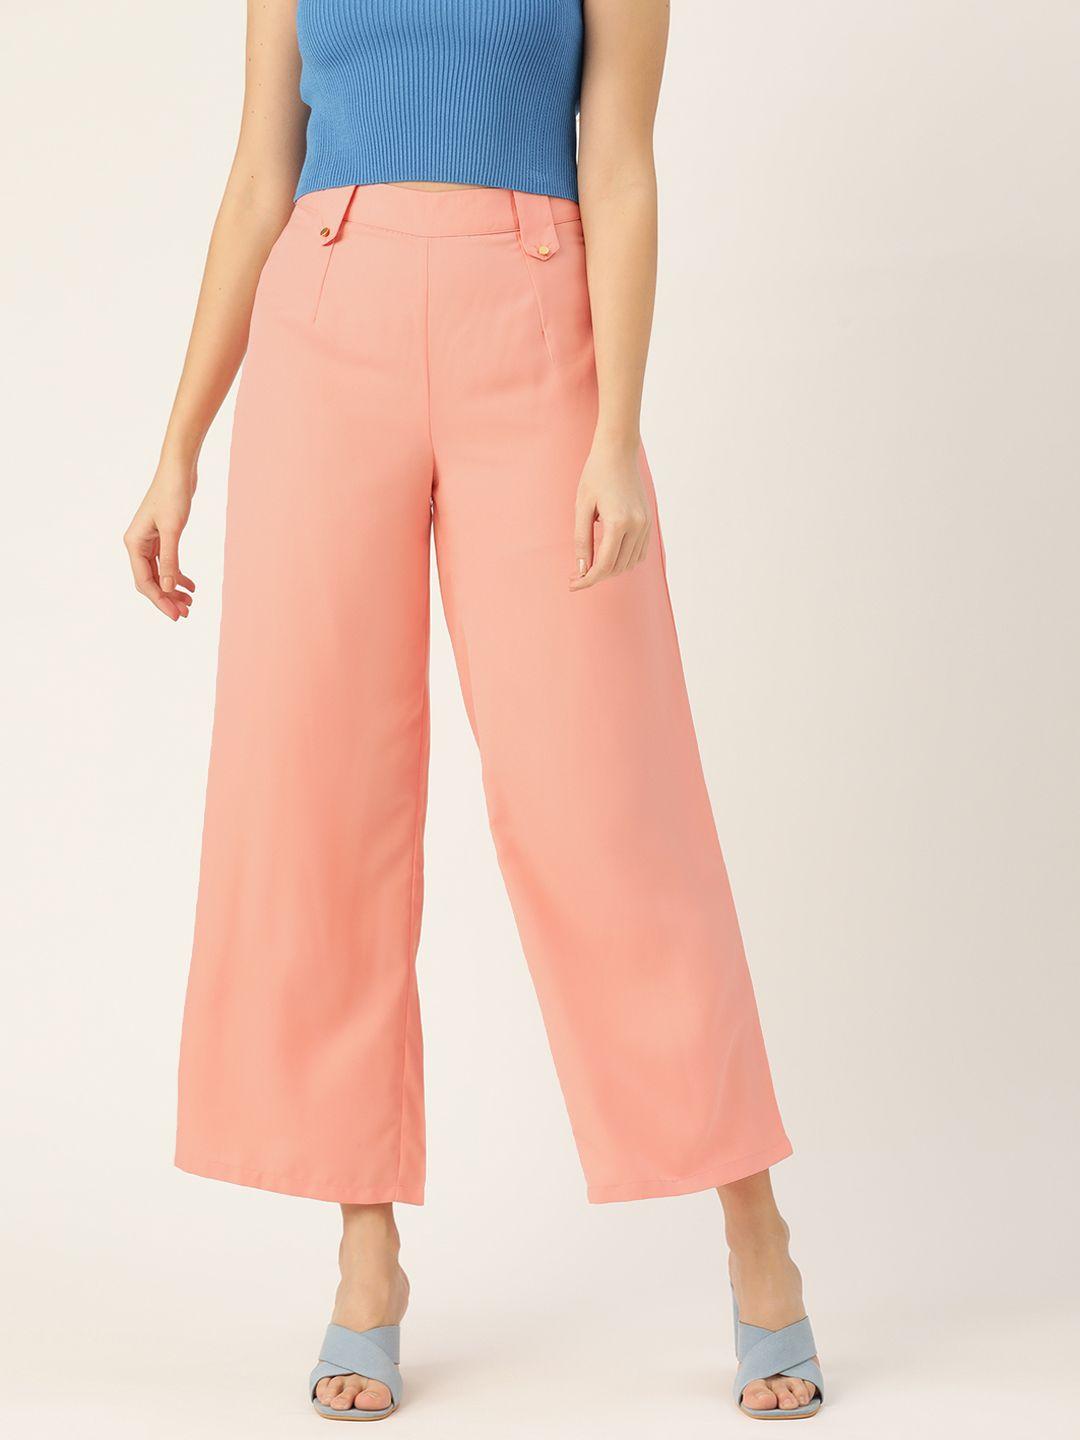 dressberry women peach-coloured textured knit parallel trousers